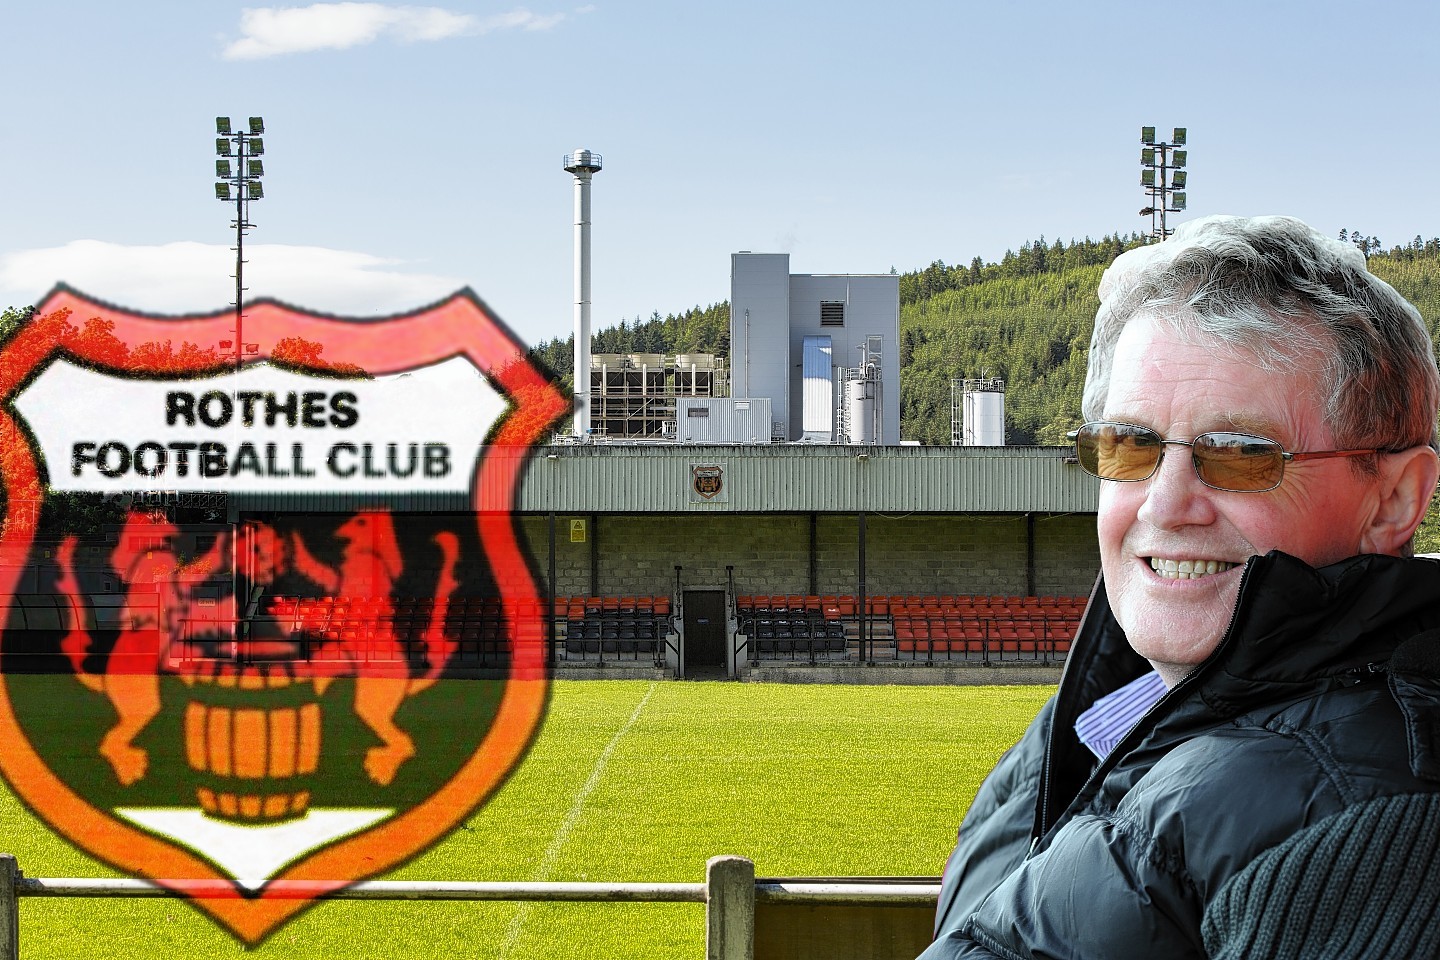 Chairman Robbie Thomson is adament Rothes will find the required funds